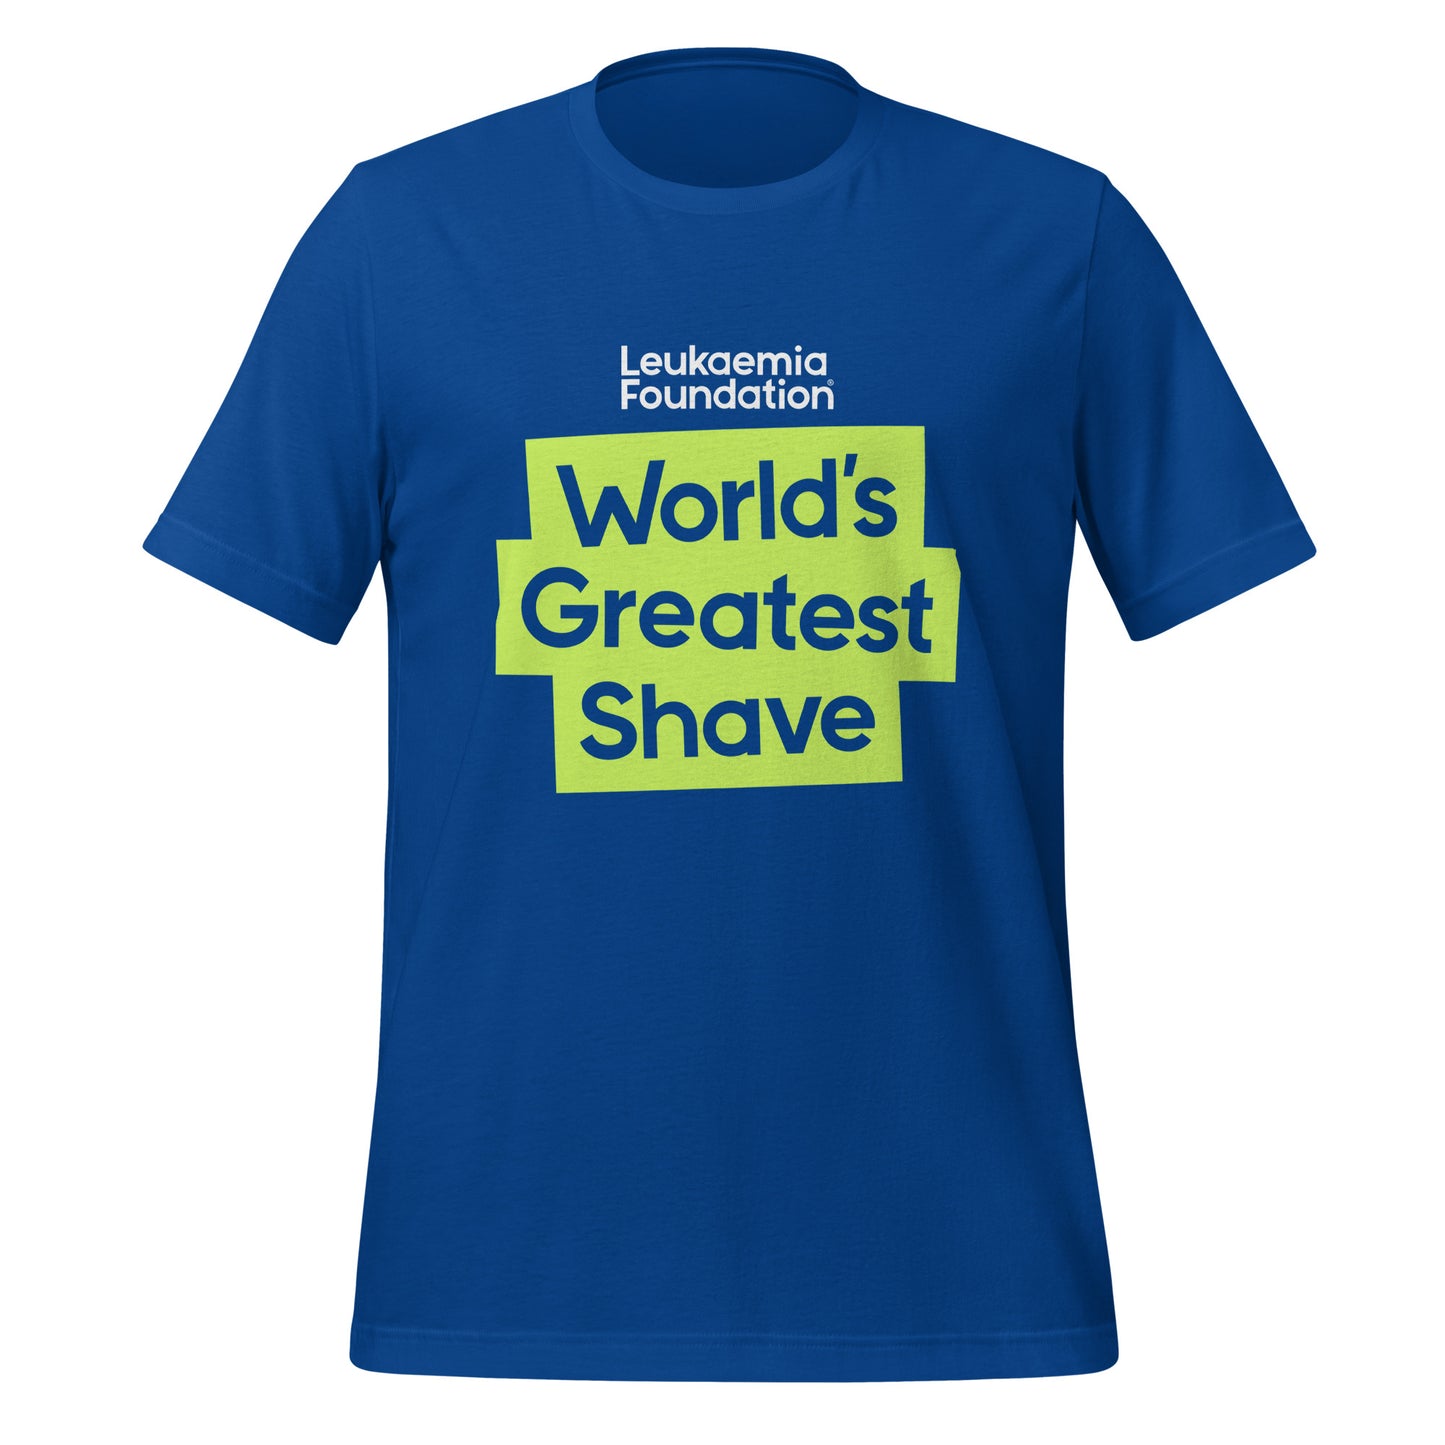 World's Greatest Shave T-Shirt - Blue